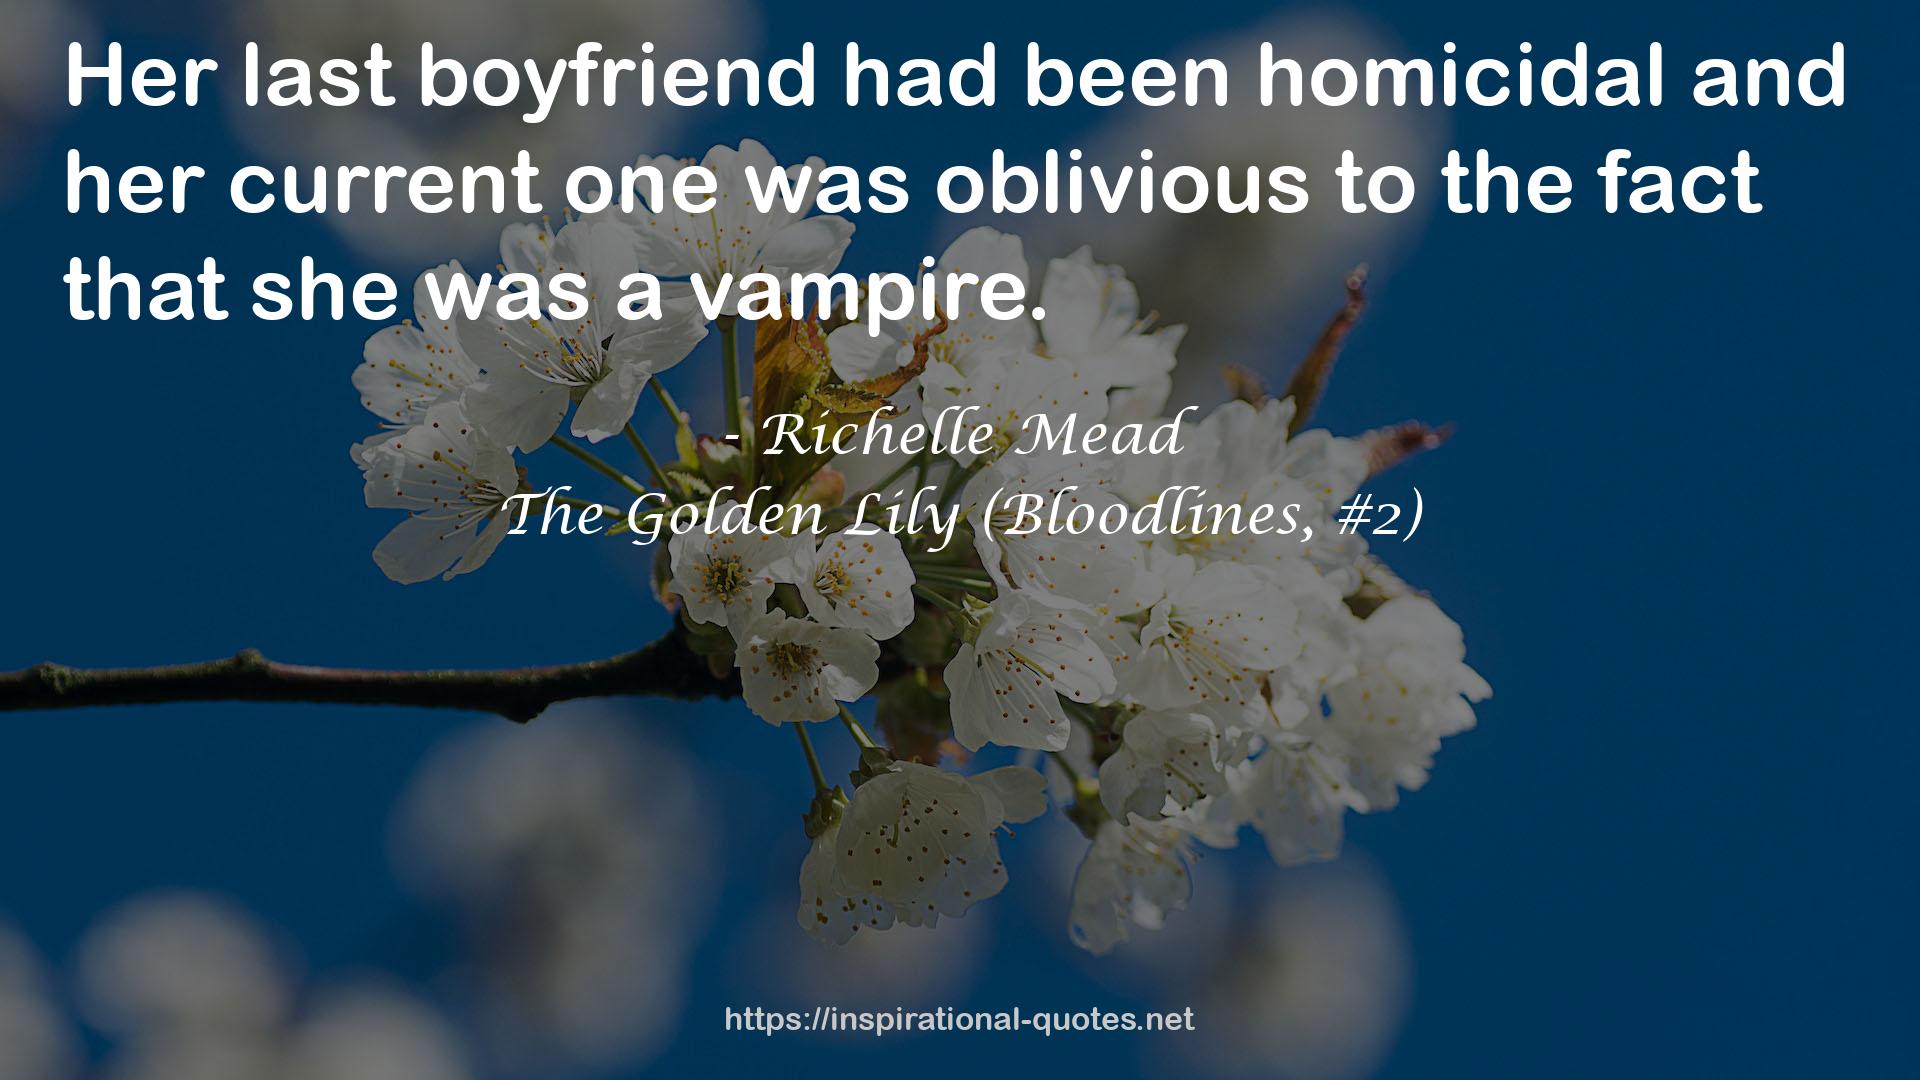 The Golden Lily (Bloodlines, #2) QUOTES